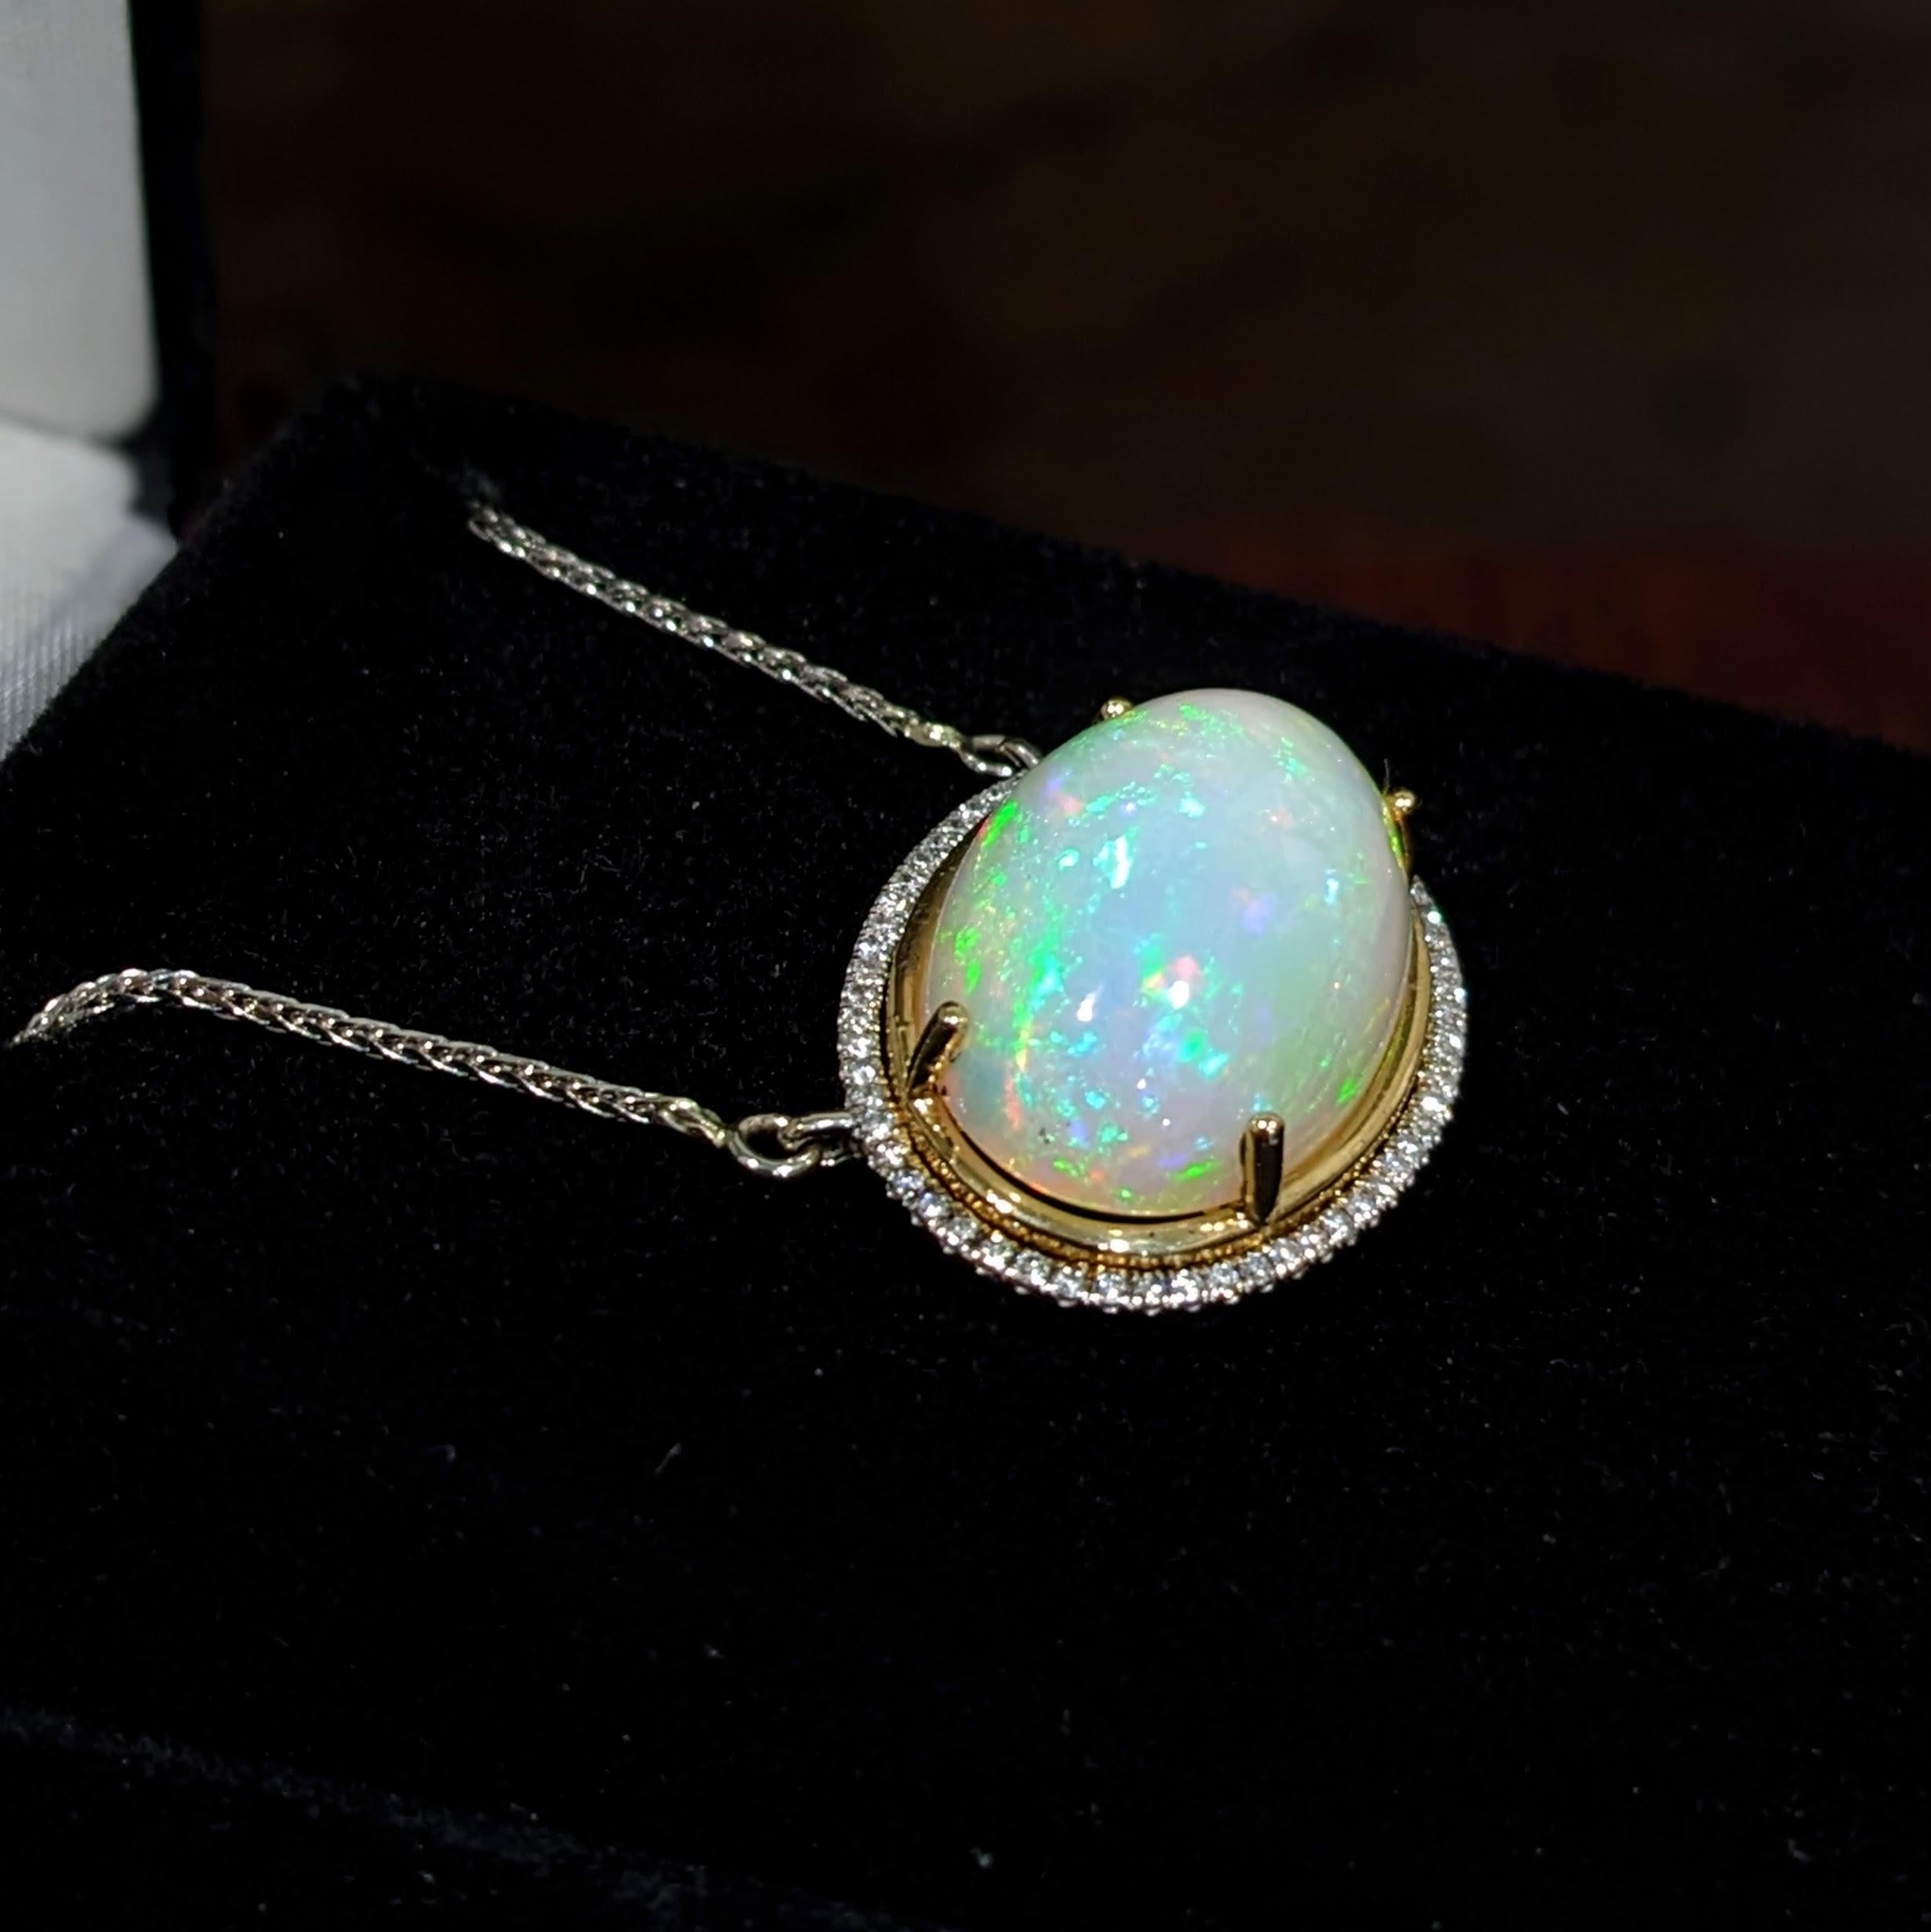 Oval Cut 4.02ct Opal Pendant w Diamond Accents in 14K Dual Tone Gold Oval 23x14mm